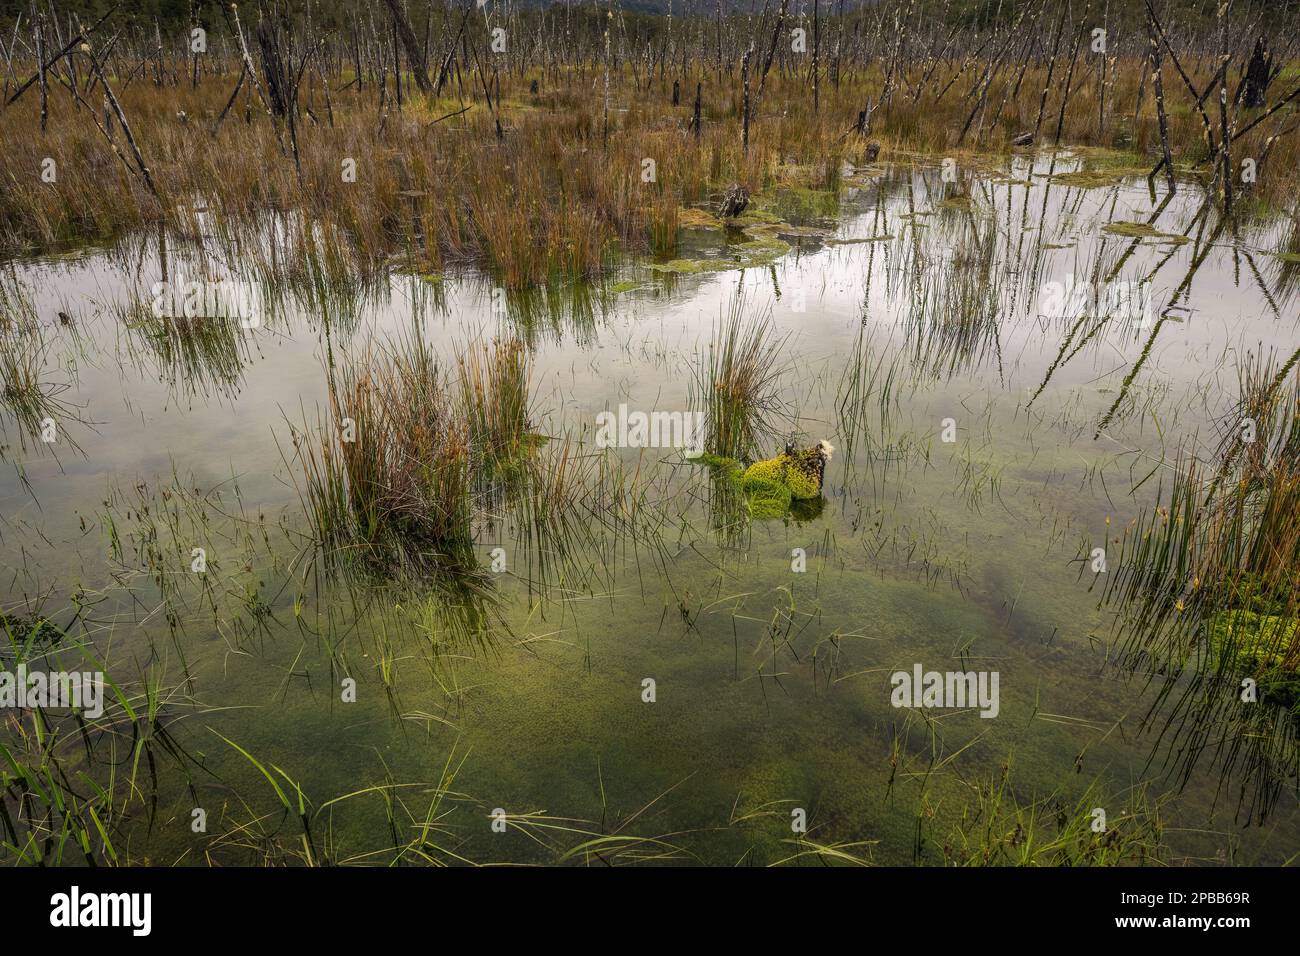 Pond with weeds, reeds and reflections with burned out tree trunks, X-109, Tortel, Patagonia Stock Photo